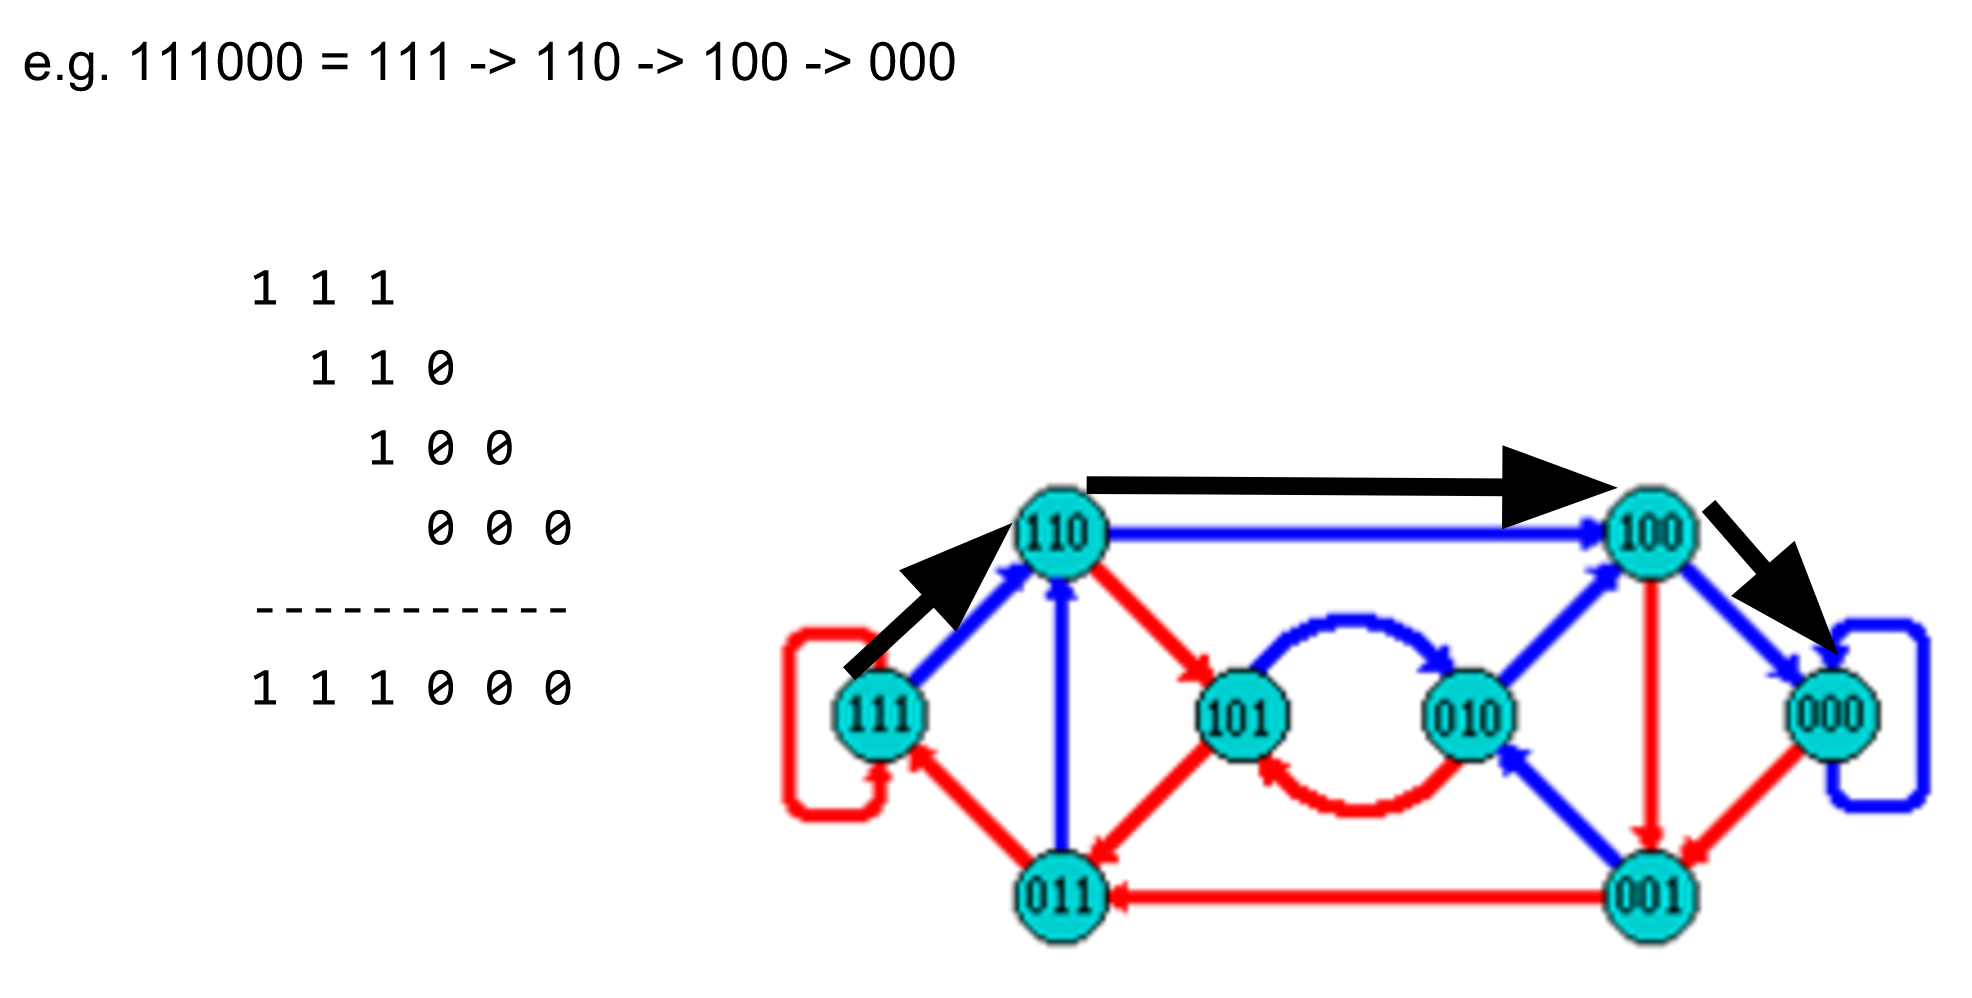 Same graph as before with arrows listing a path through the graph. Nodes 111, 110, 100, and 000 combine into 111000.